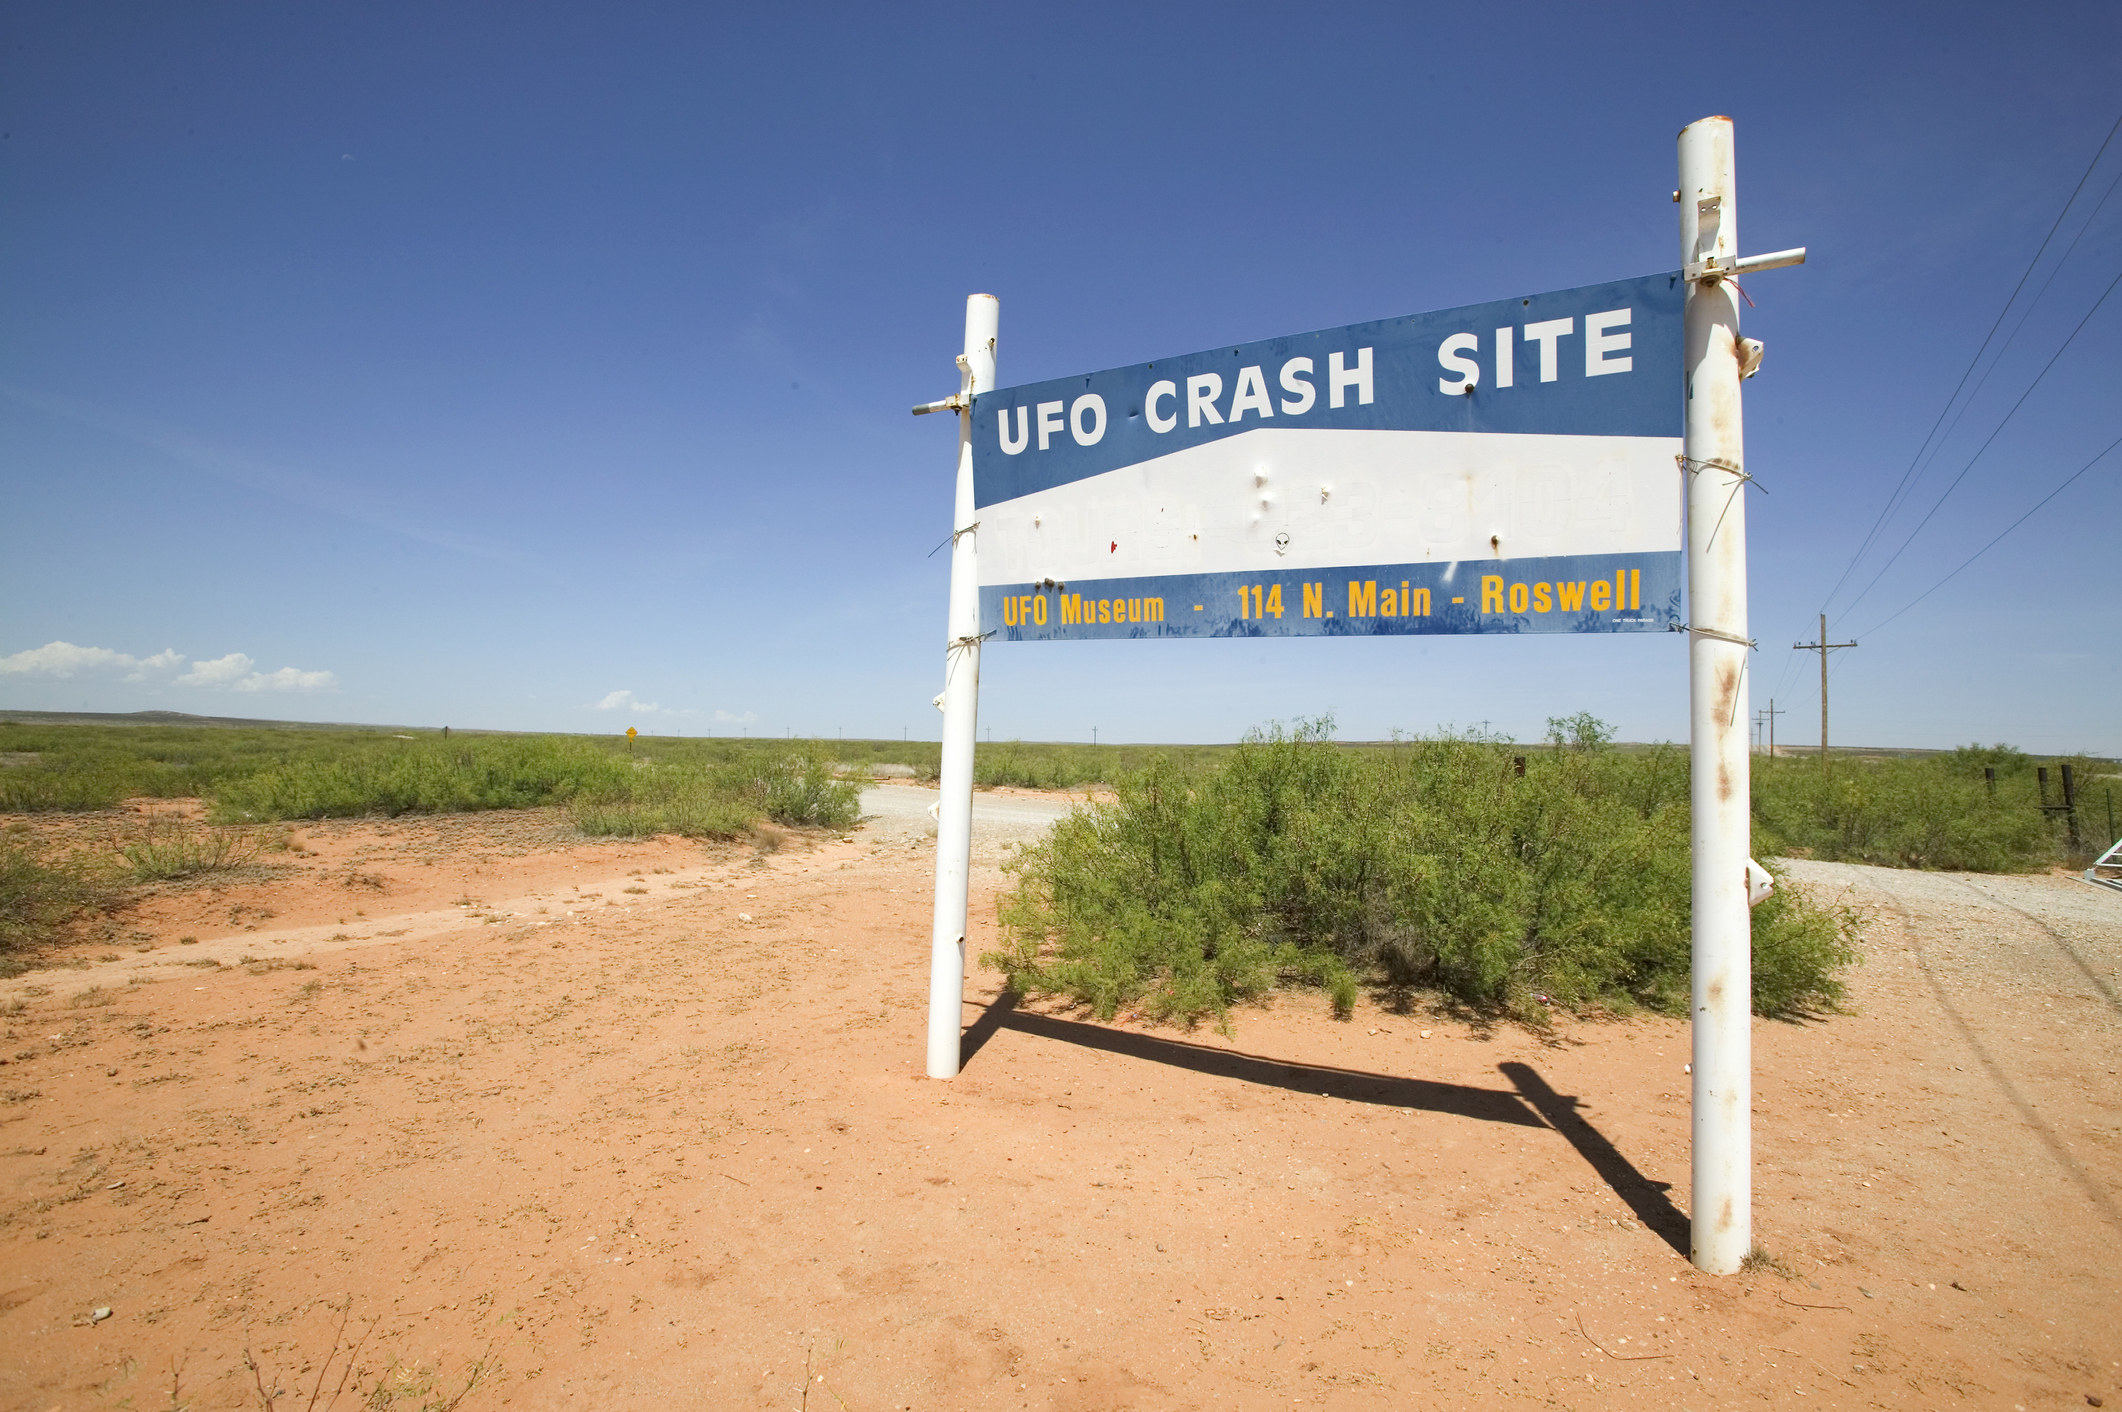 A sign for the UFO crash site in Roswell.